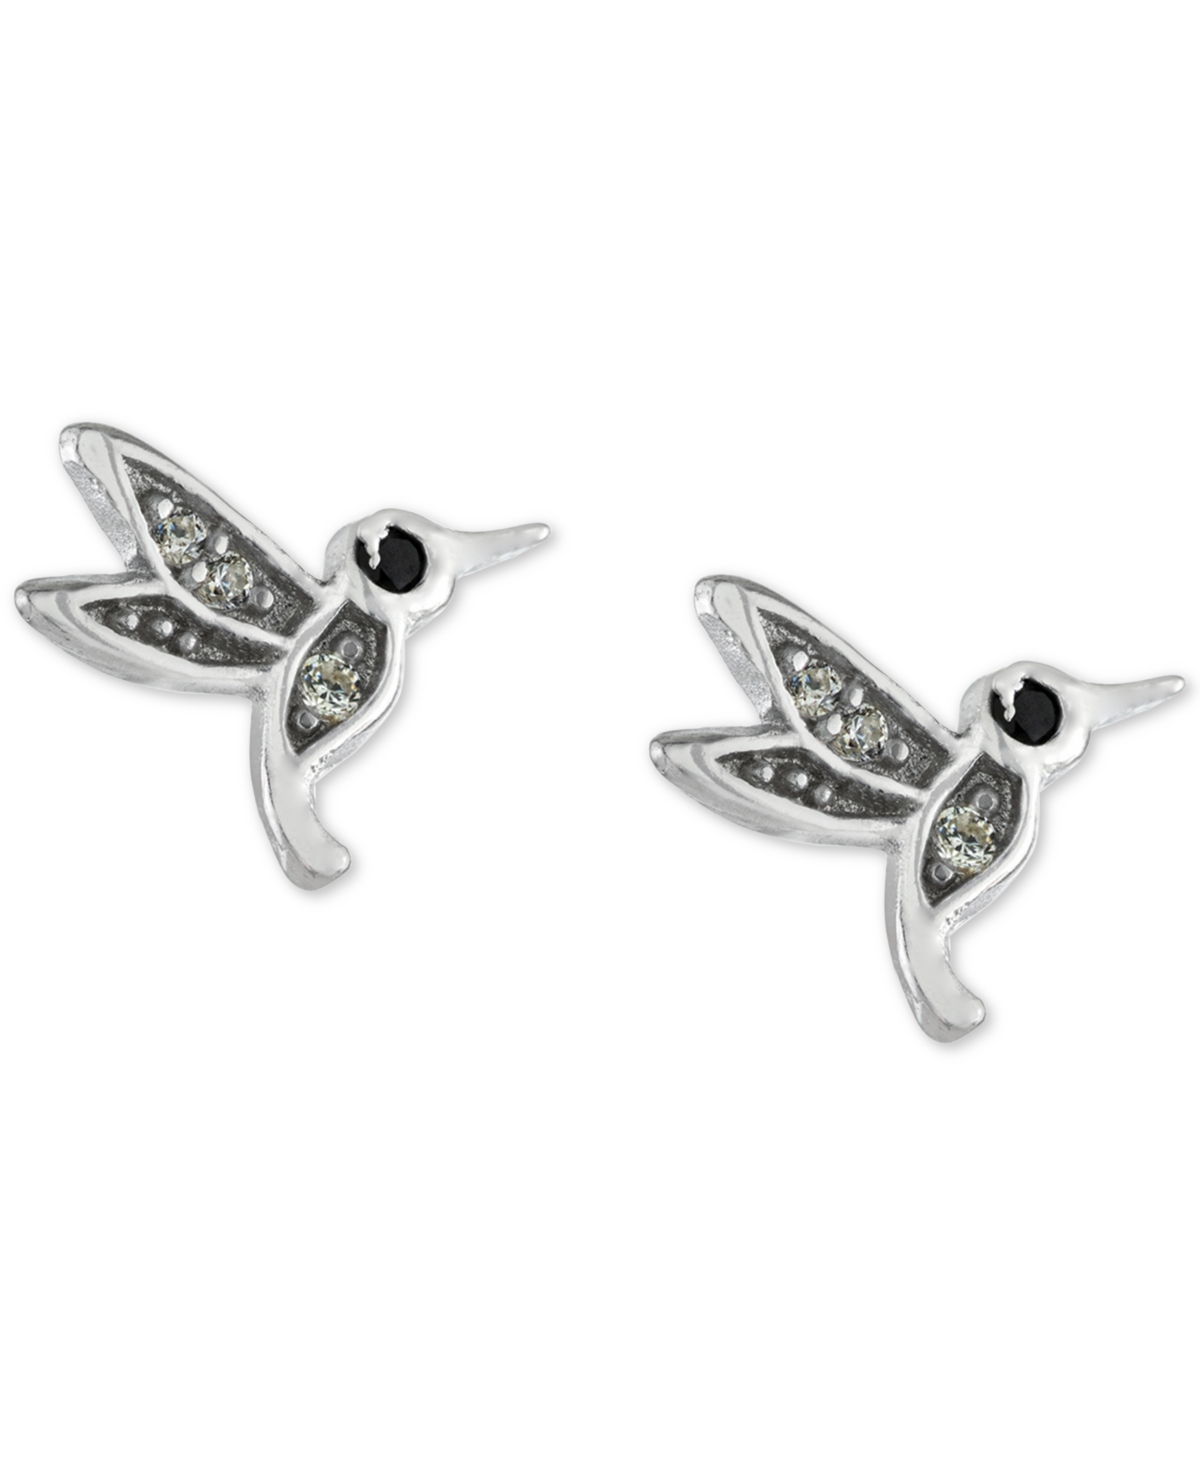 Cubic Zirconia Hummingbird Stud Earrings in Sterling Silver, Created for Macy's - Sterling Silver